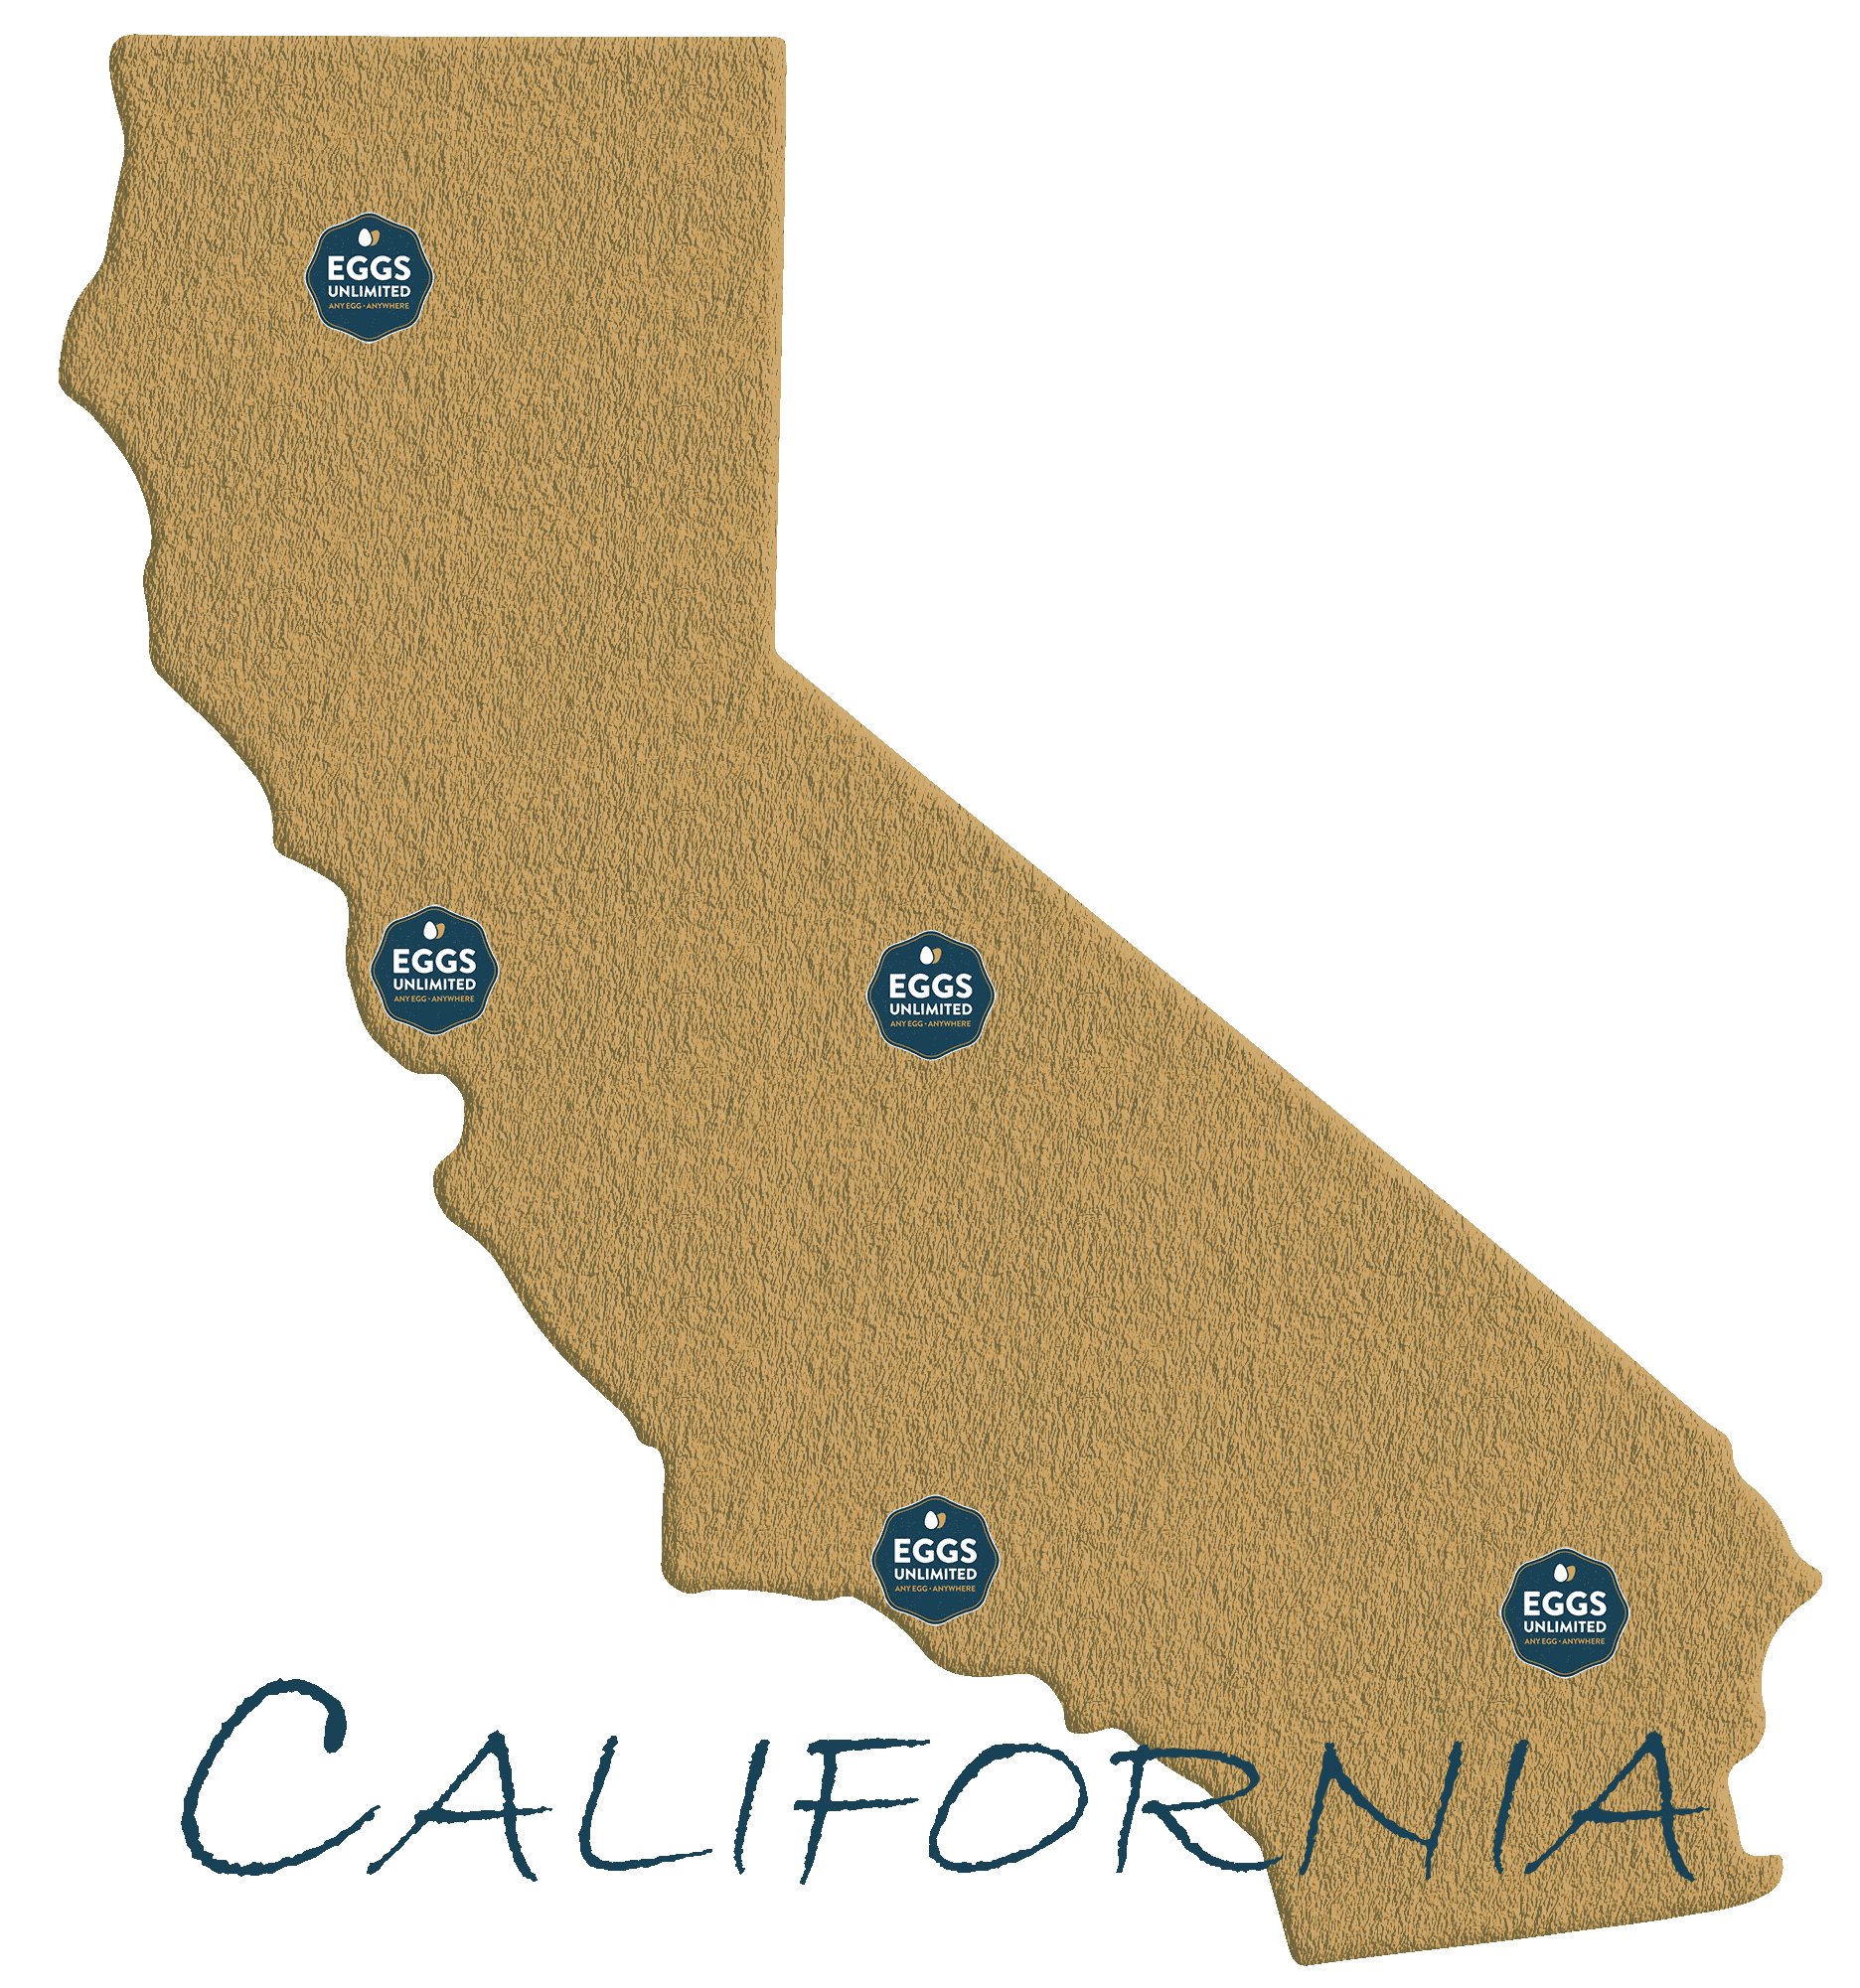 A state where eggs unlimited provides egg in California State for eggs unlimited an egg wholesaler map